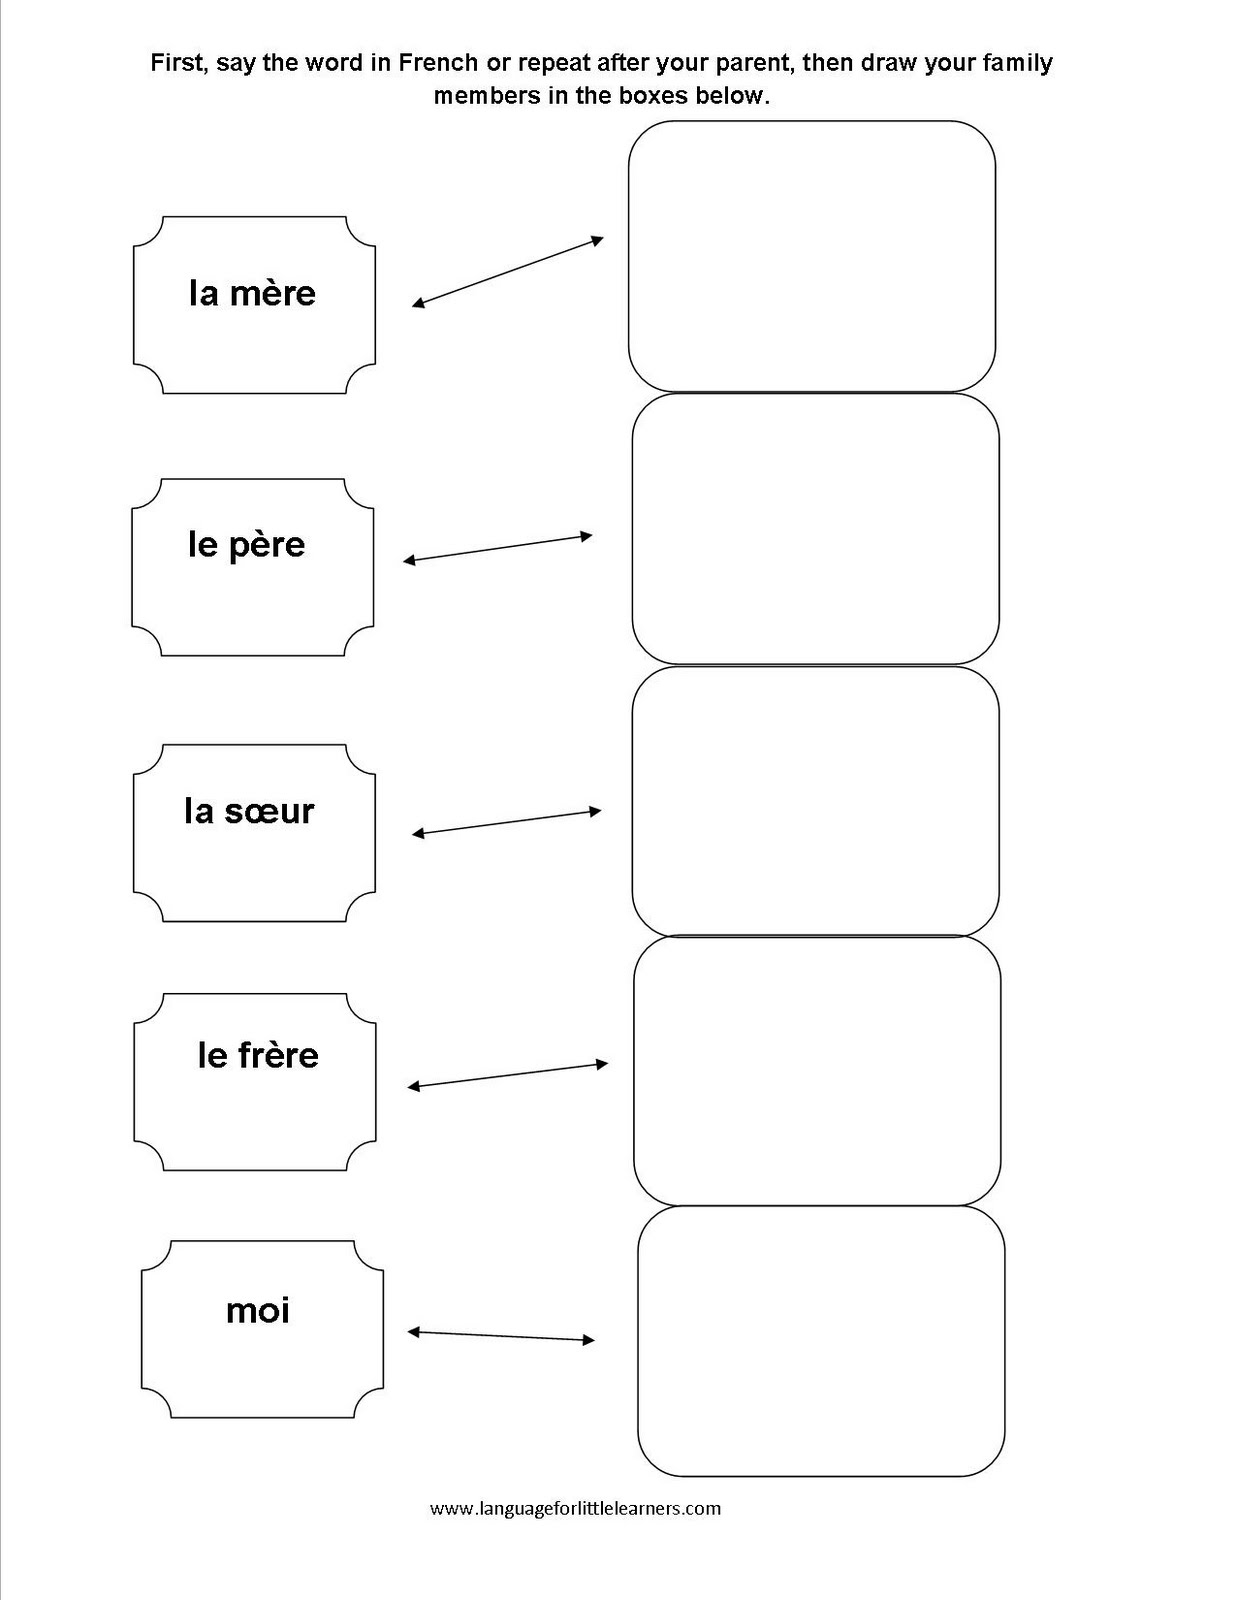 French Family Members Worksheets Image